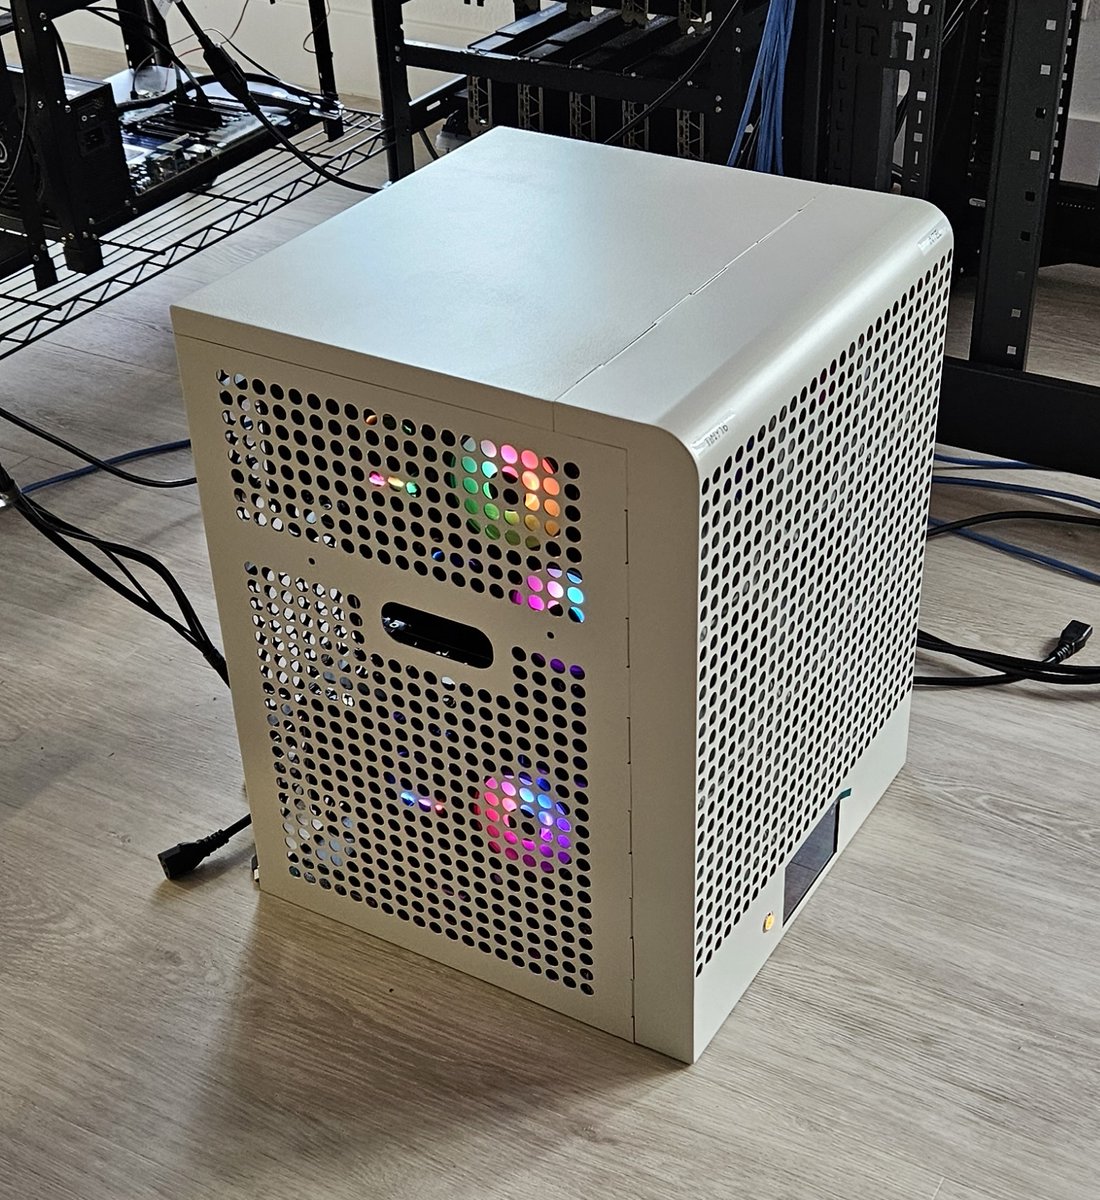 tinybox with 6x Intel Arc A770 is colorful!